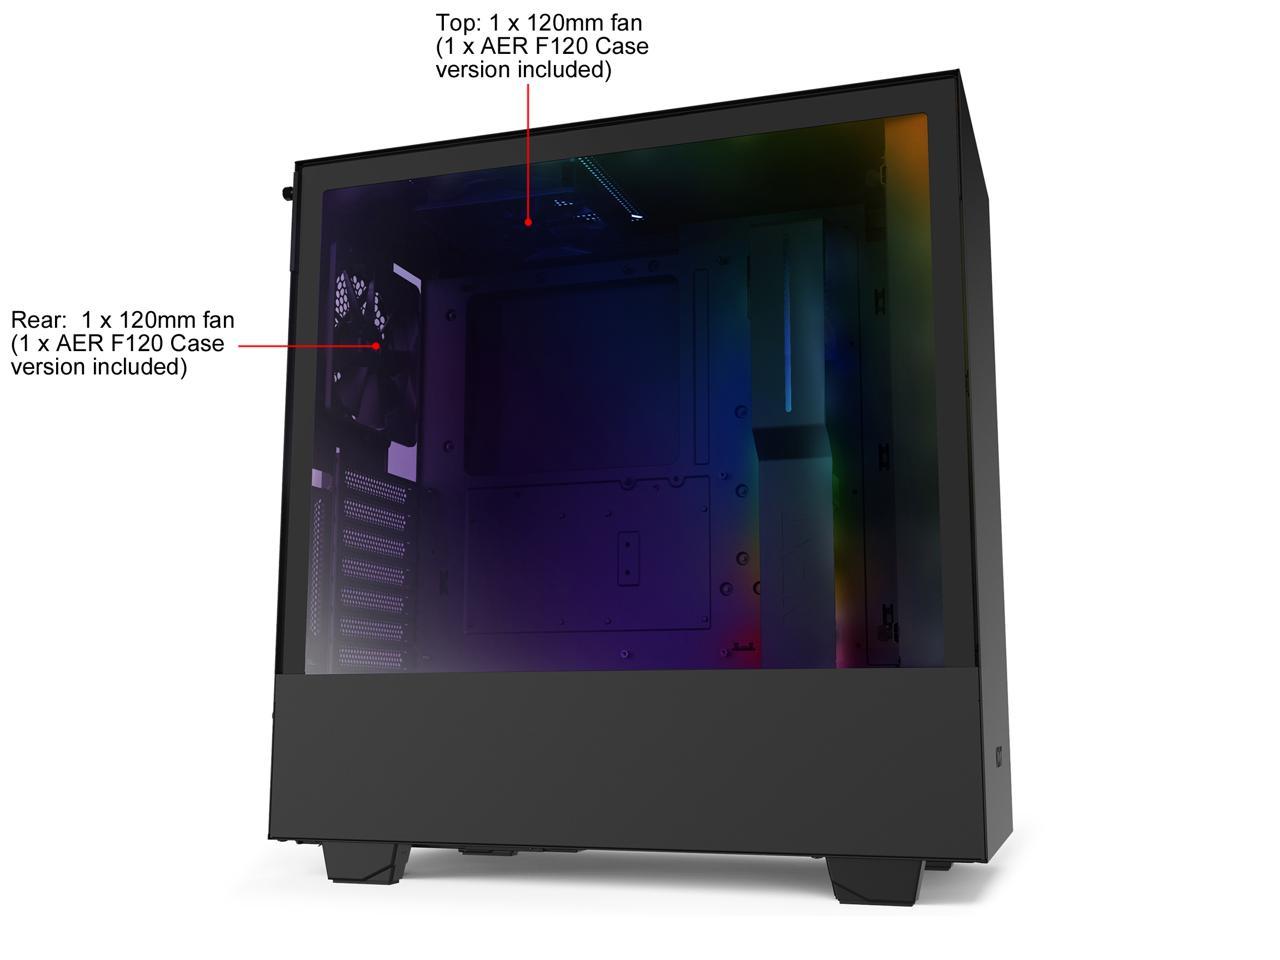 NZXT H510i - Compact ATX Mid-Tower PC Gaming Case - Front I/O USB Type-C Port - Vertical GPU Mount - Tempered Glass Side Panel - Integrated RGB Lighting - Water-Cooling Ready - Black